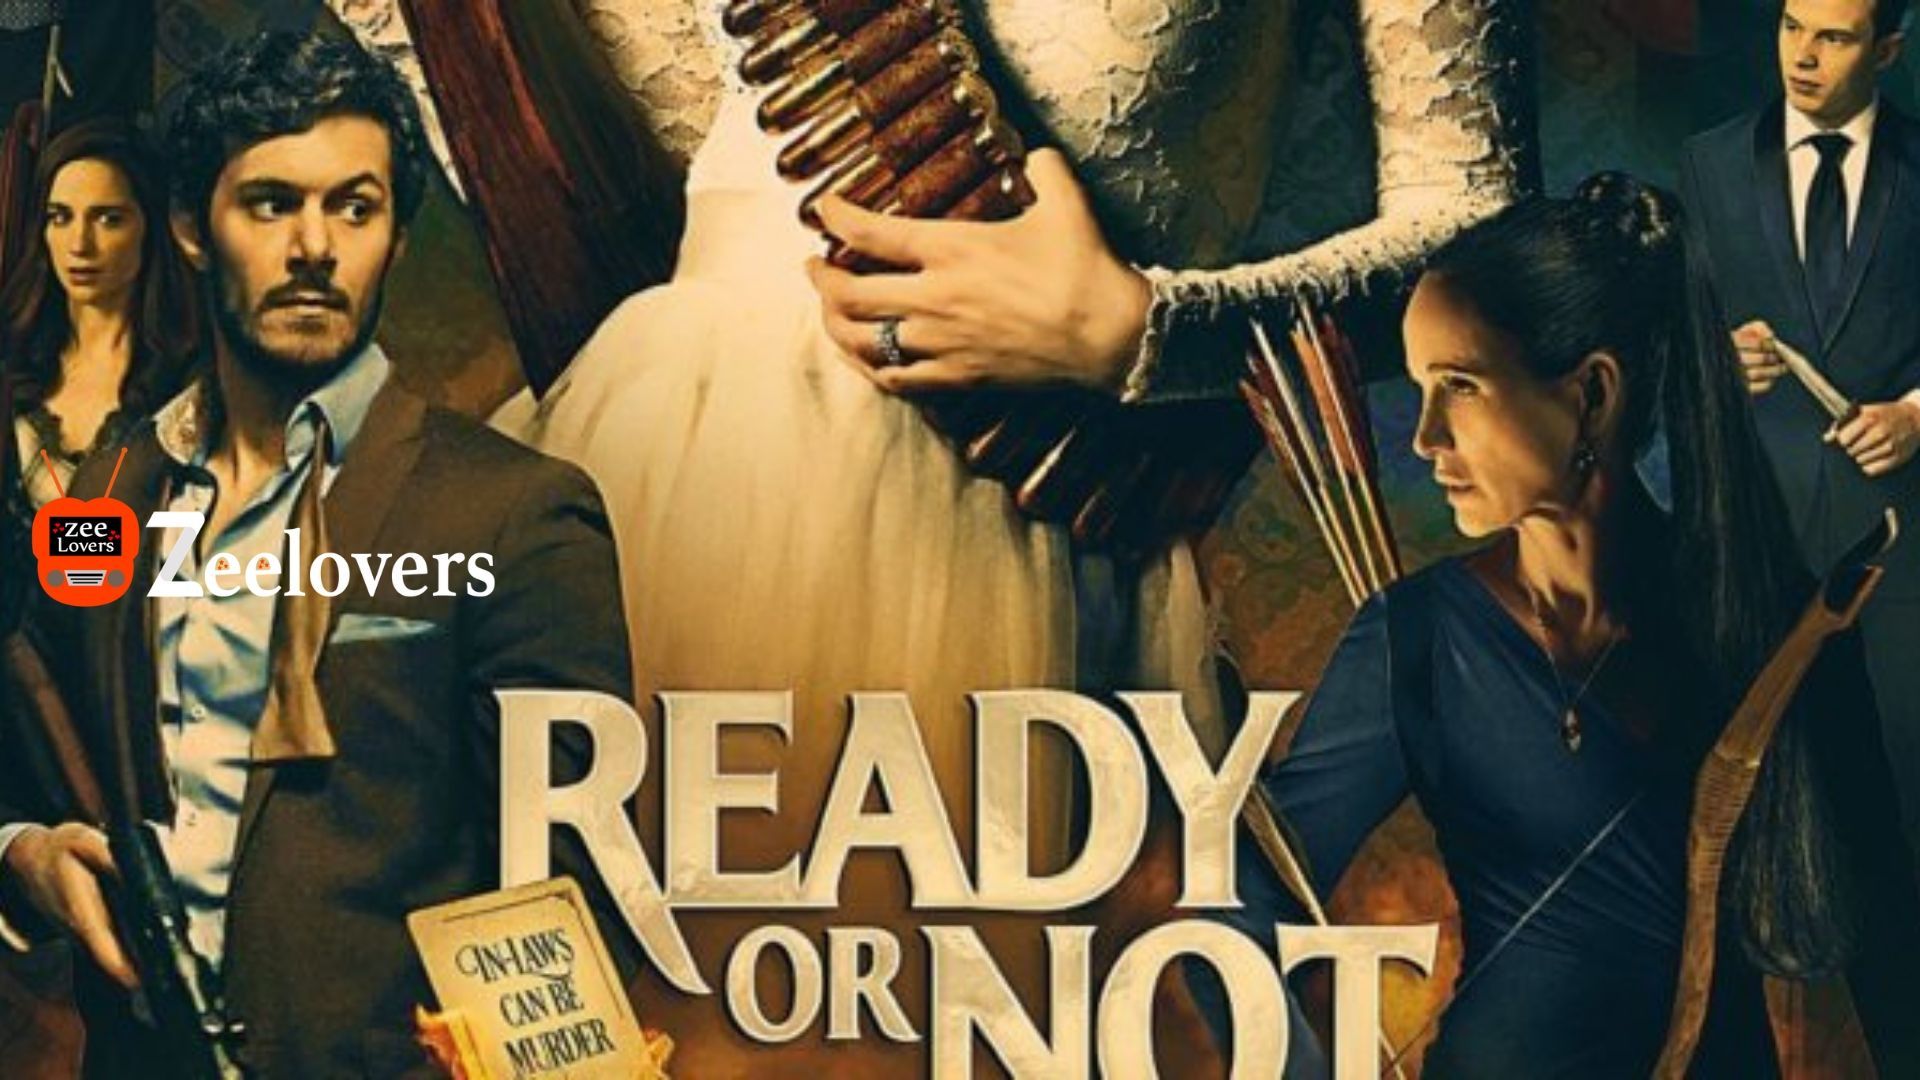 Shola Thompson Reviews The Movie 'Ready Or Not'